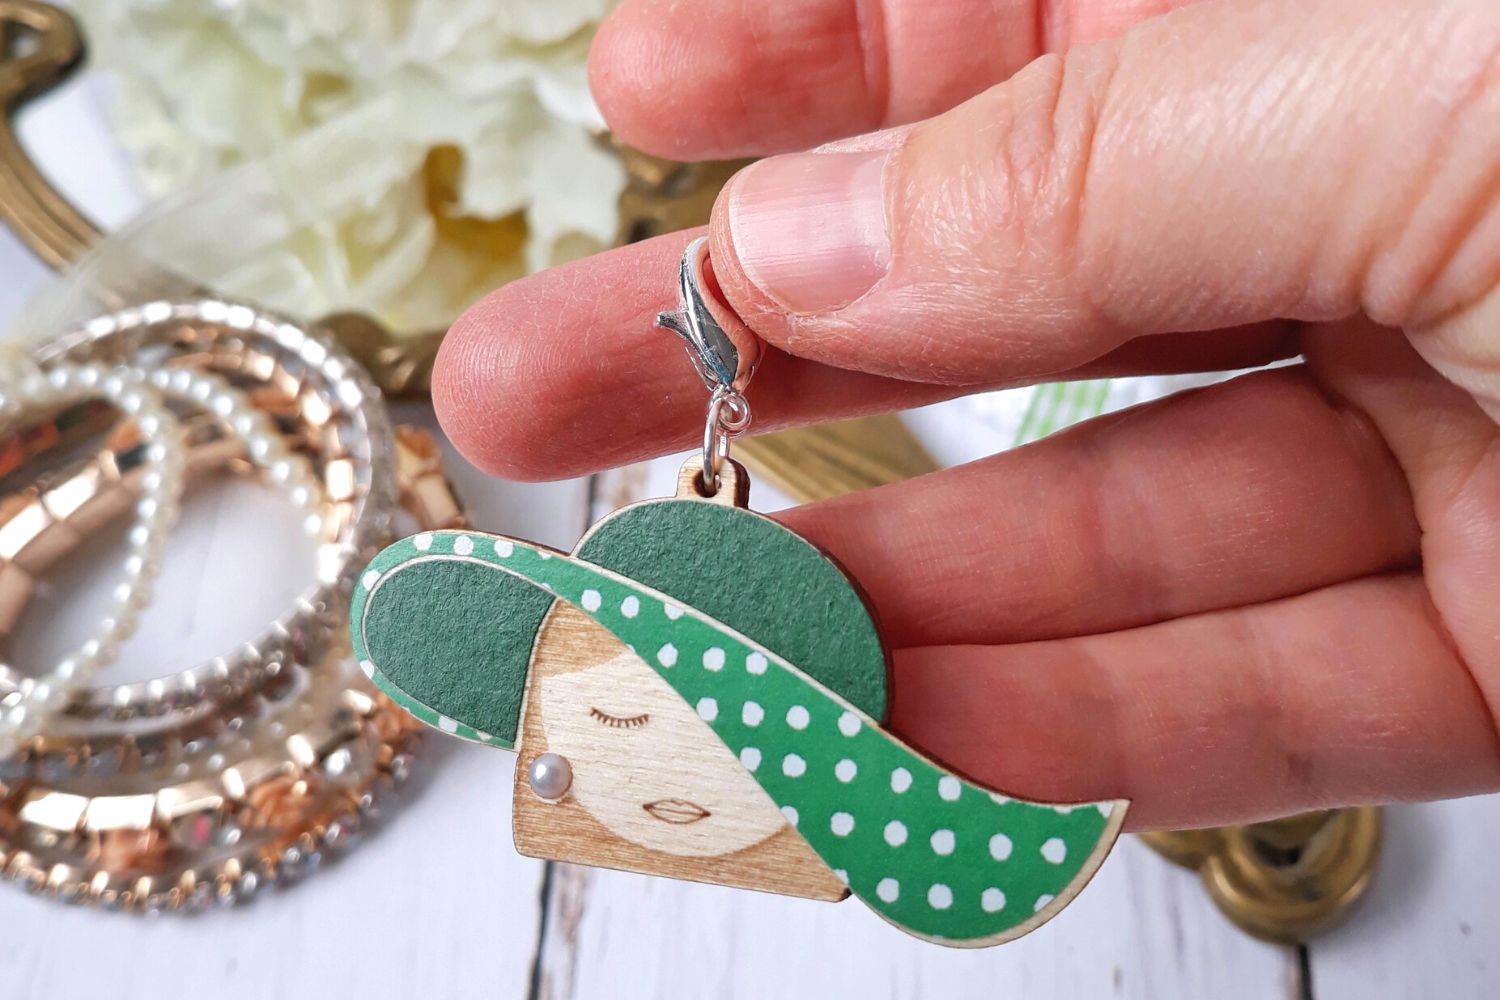 Hand holding wooden stitch marker of a lady with a green polka dot hat in front of white flowers in the background